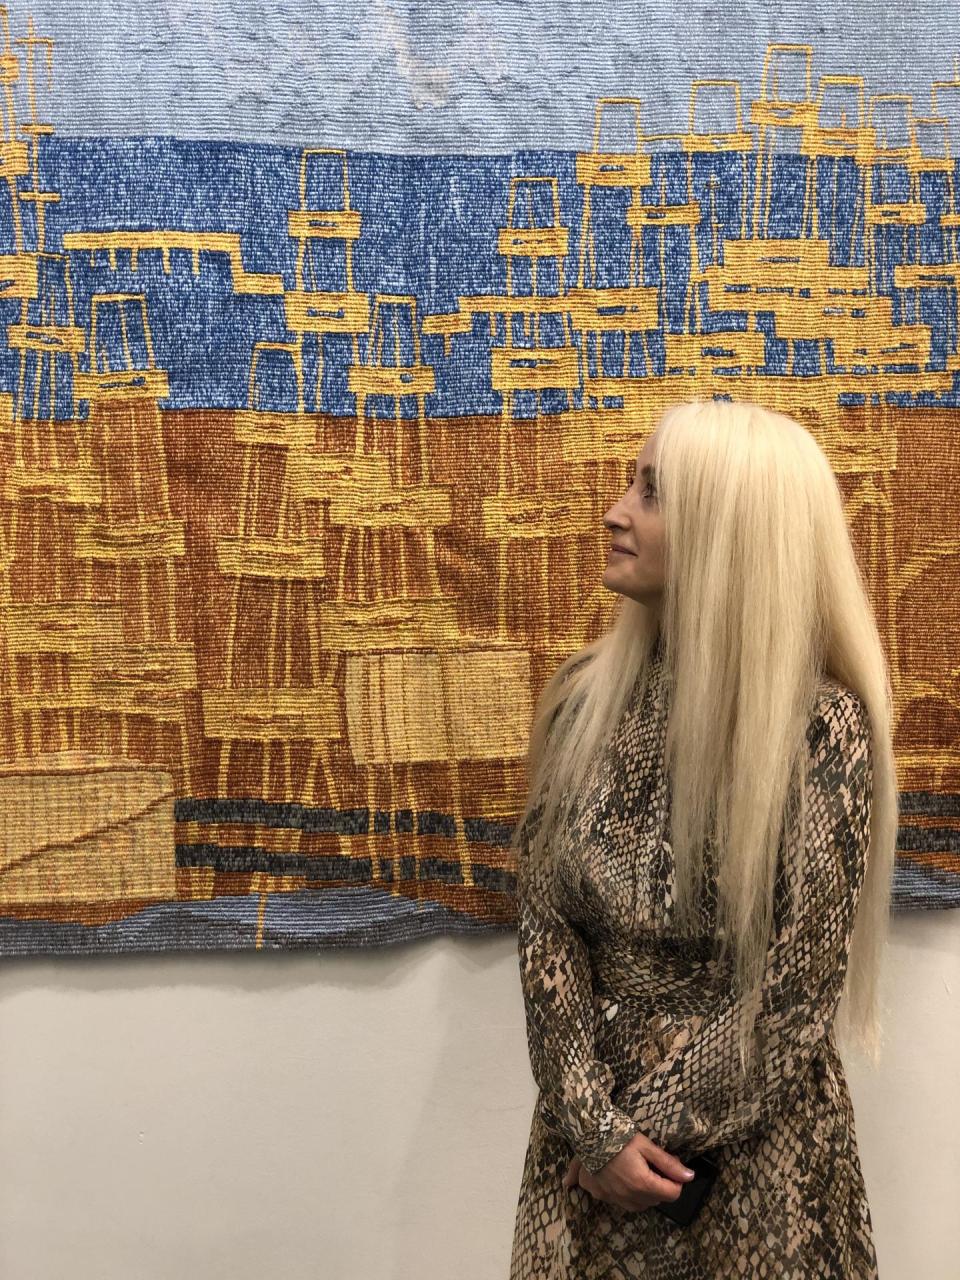 National tapestry artist presents her work in UK [PHOTO]